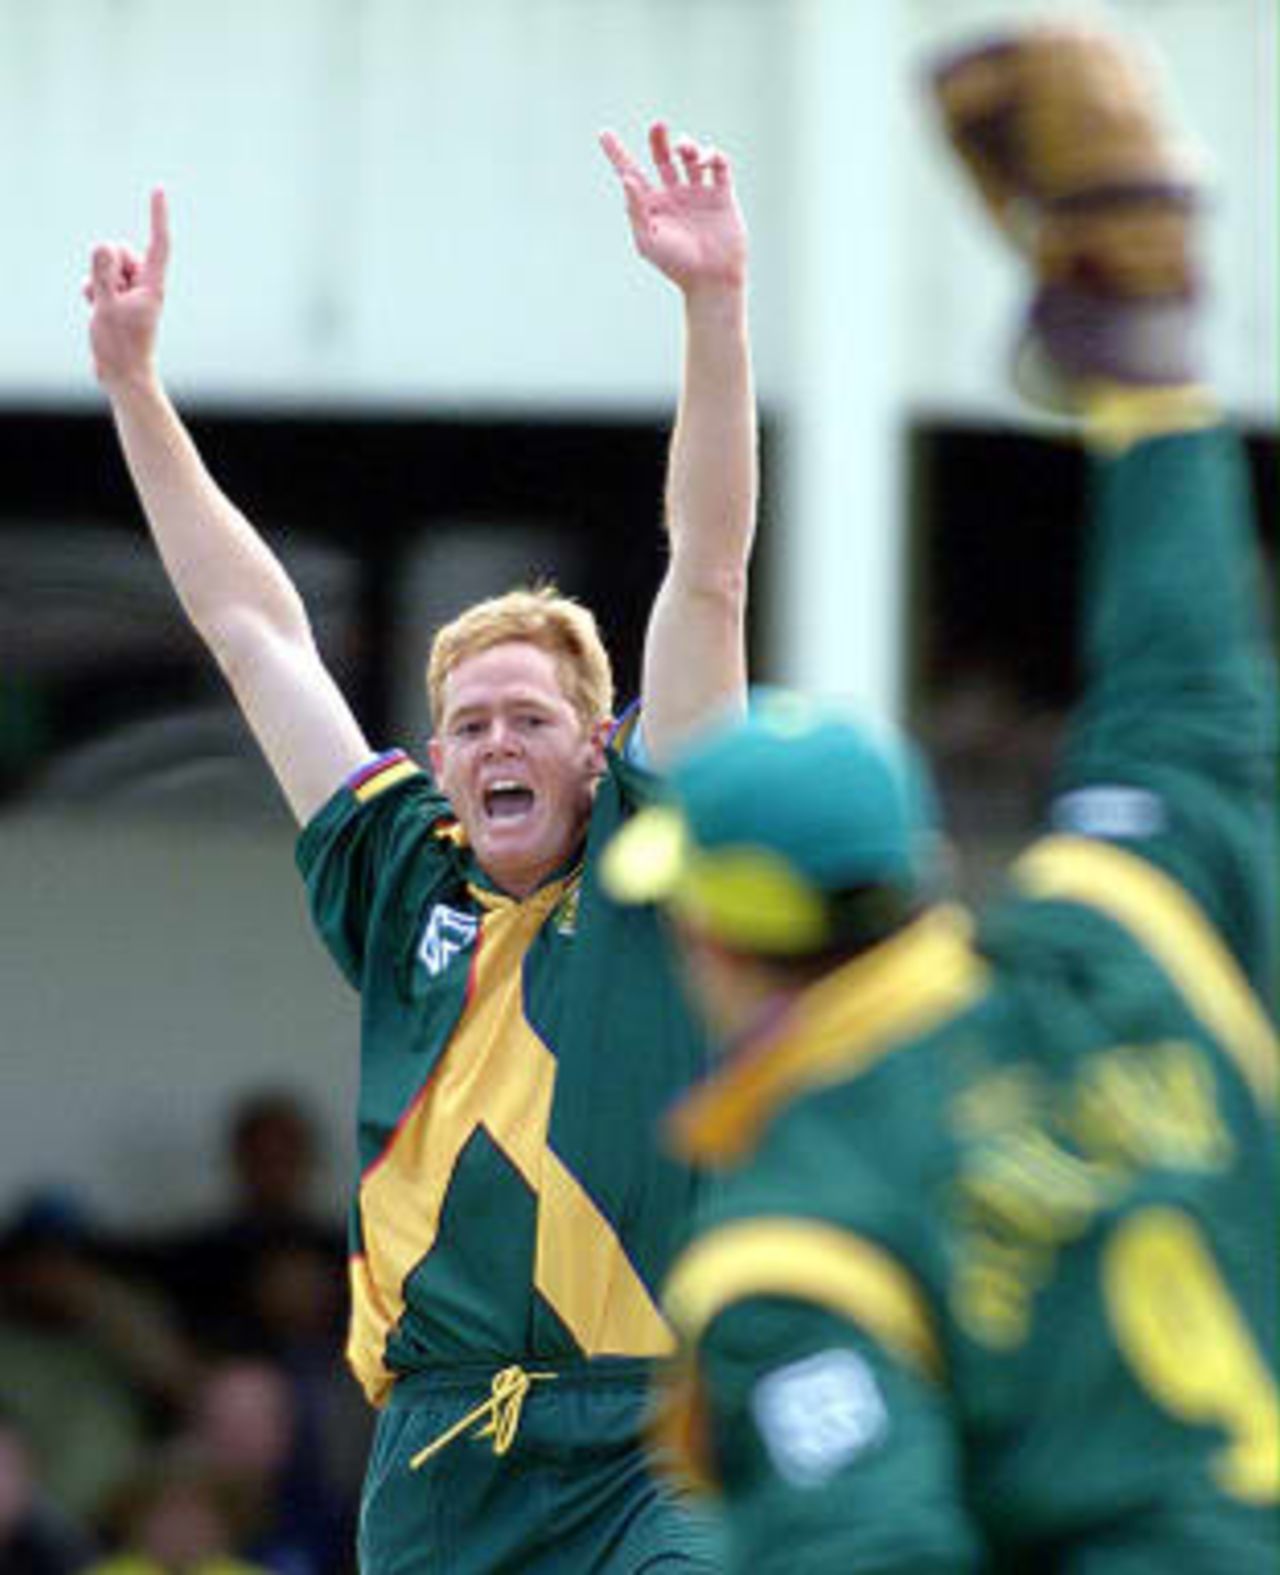 South Africa's Shaun Pollock (L) celebrates with wicketkeeper Mark Boucher after Australia's Glenn McGrath was bowled out to bring the innings to an end with Pollock taking 5 for 36 runs 17 June 1999, during their semi-final match in the Cricket World Cup at Edgbaston, Birmingham. The final will be at Lords in London 20 June 1999